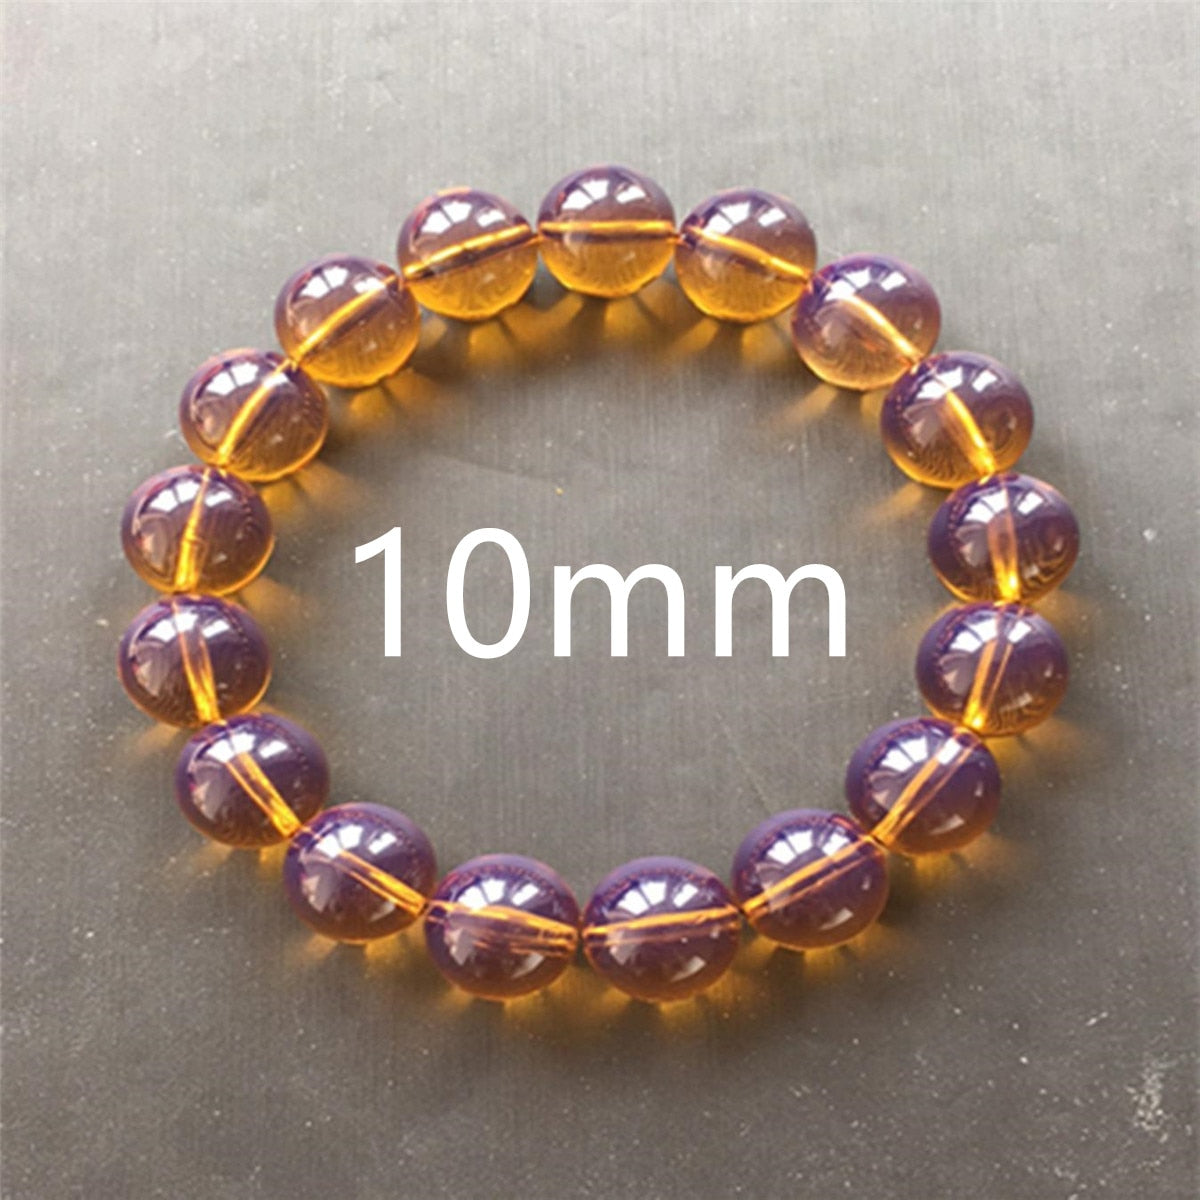 Genuine Natural Yellow Amber Blue Dominican Round Beads Bracelet Women Men Amber Healing 12mm 10mm 8mm Stretch Jewelry AAAAA 10mm